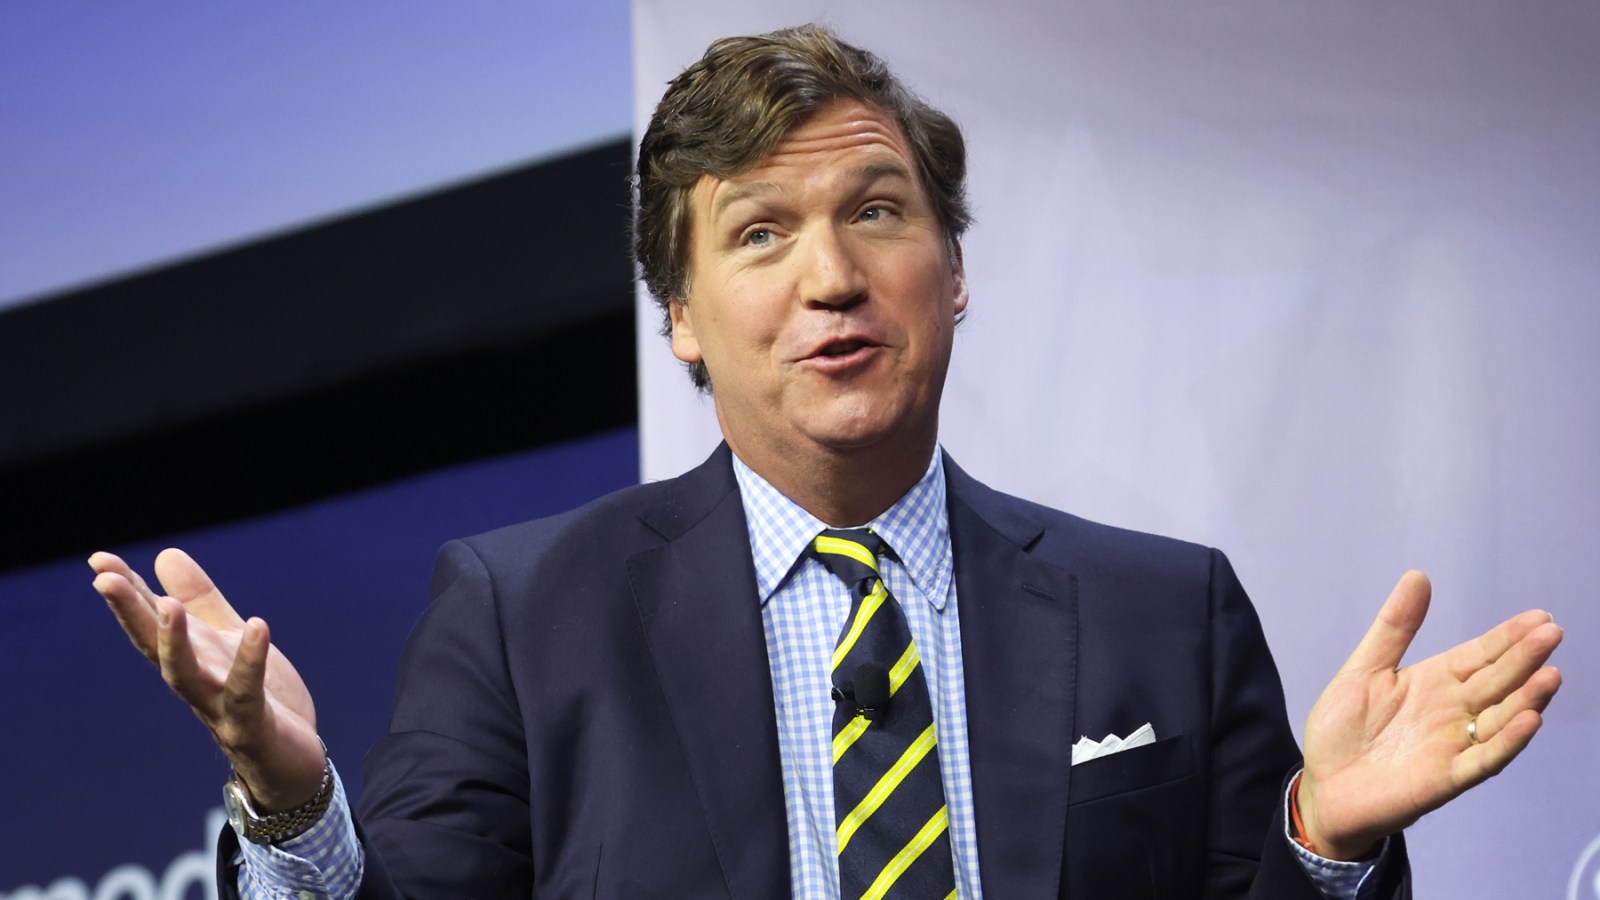 Tucker Carlson Proclaims Interview With Putin. He’s Praised the Russian Chief for Years